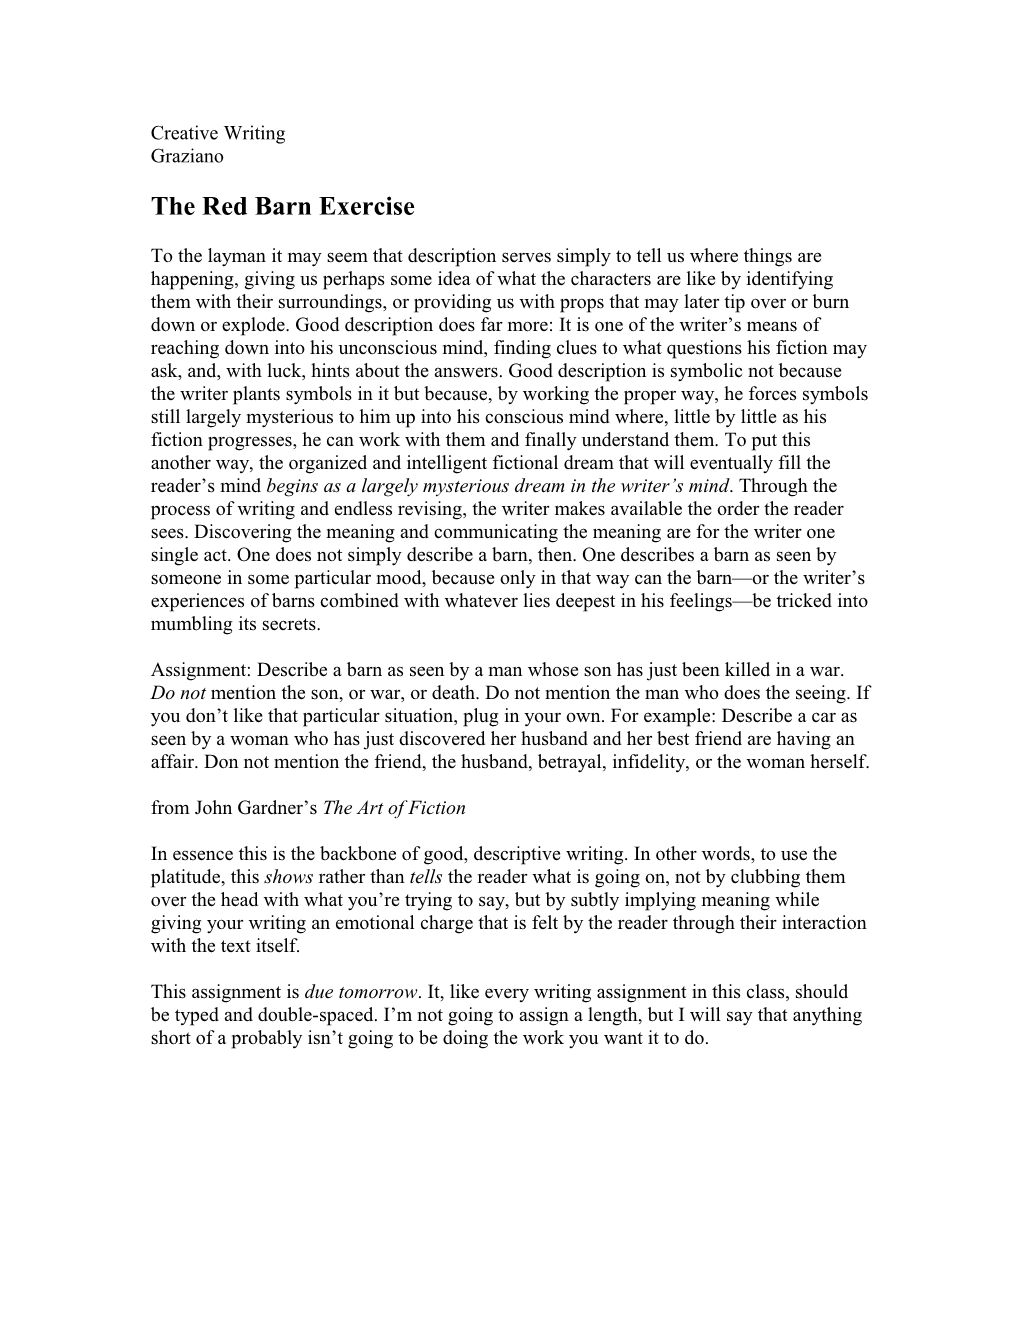 The Red Barn Exercise